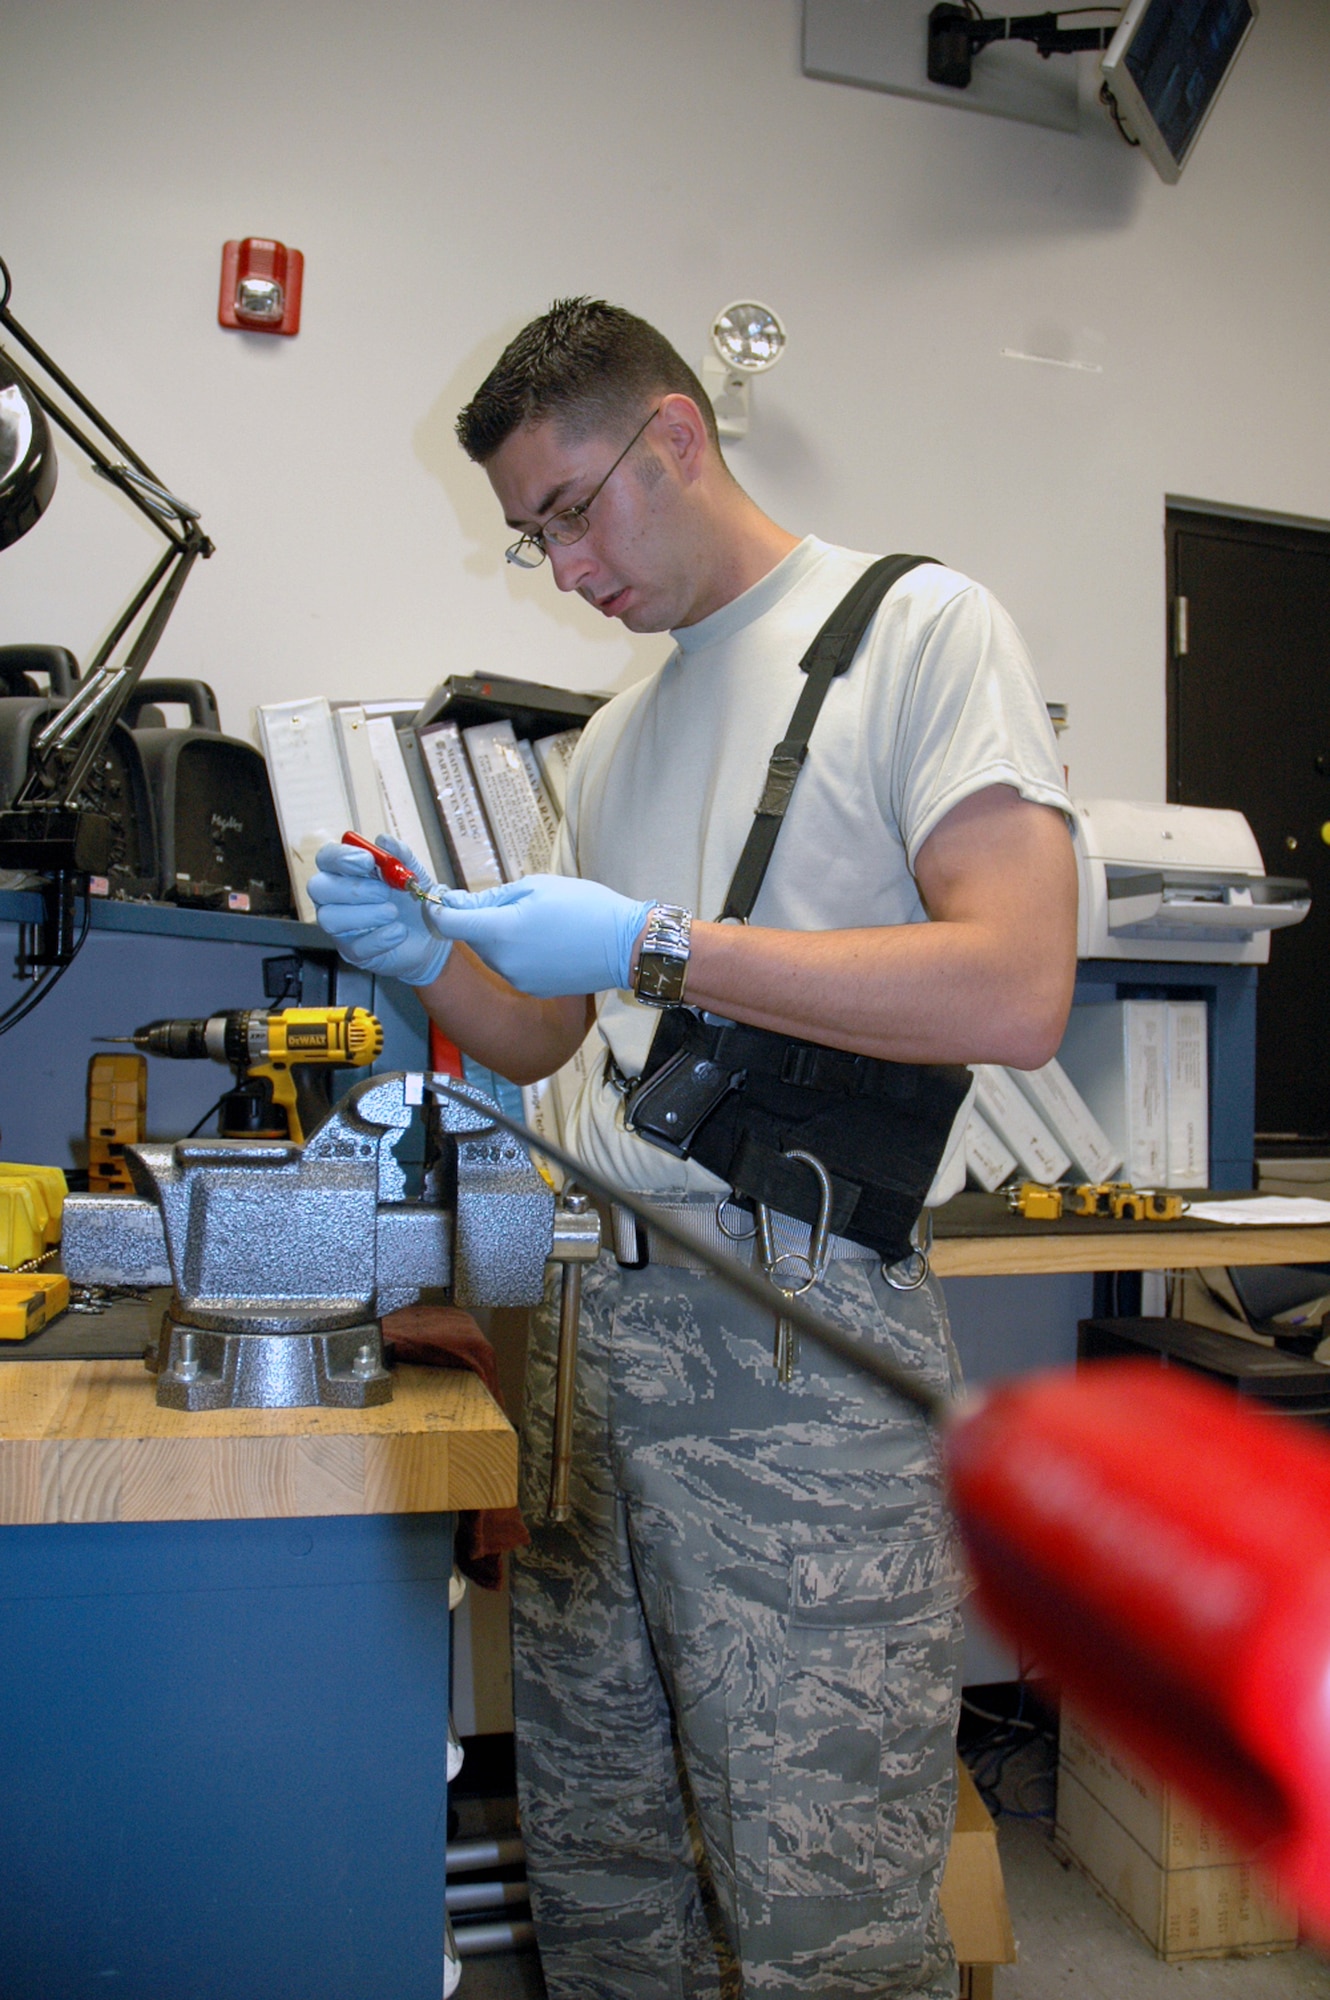 Staff Sgt. Ryan Marcotte, U.S. Air Force Expeditionary Center armory, works on repairing gun cleaning equipment inside the armory June 19, 2008, on Fort Dix, N.J.  The USAF EC's armory is one of the largest in the Air Force and holds the Air Force's largest inventory of foreign weapons on the U.S.' East Coast.  Largely, the Center's weapons are used for training in numerous expeditionary field courses.  (U.S. Air Force Photo/Tech. Sgt. Scott T. Sturkol)